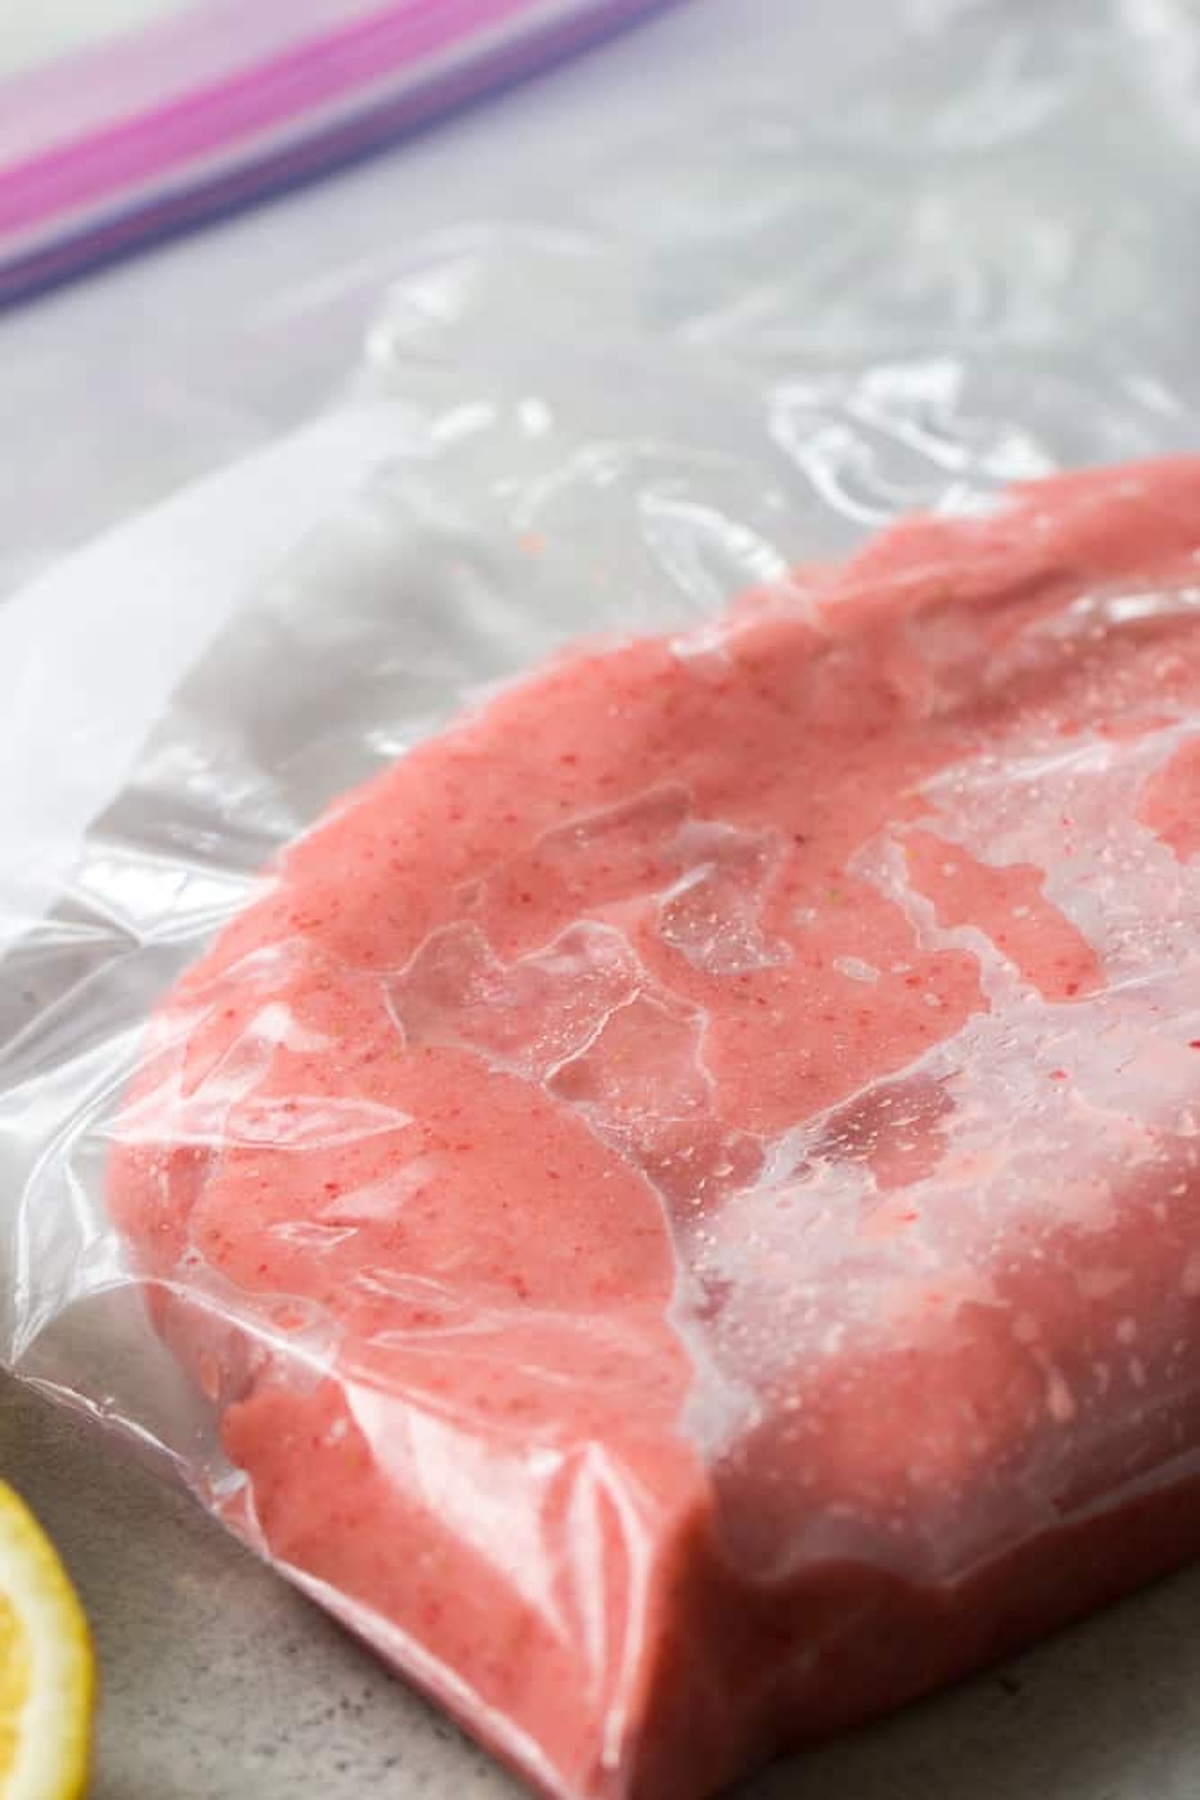 A close-up of a clear plastic bag filled with a pink, blended substance, possibly a fruit smoothie or puree, lying on a light-colored surface.